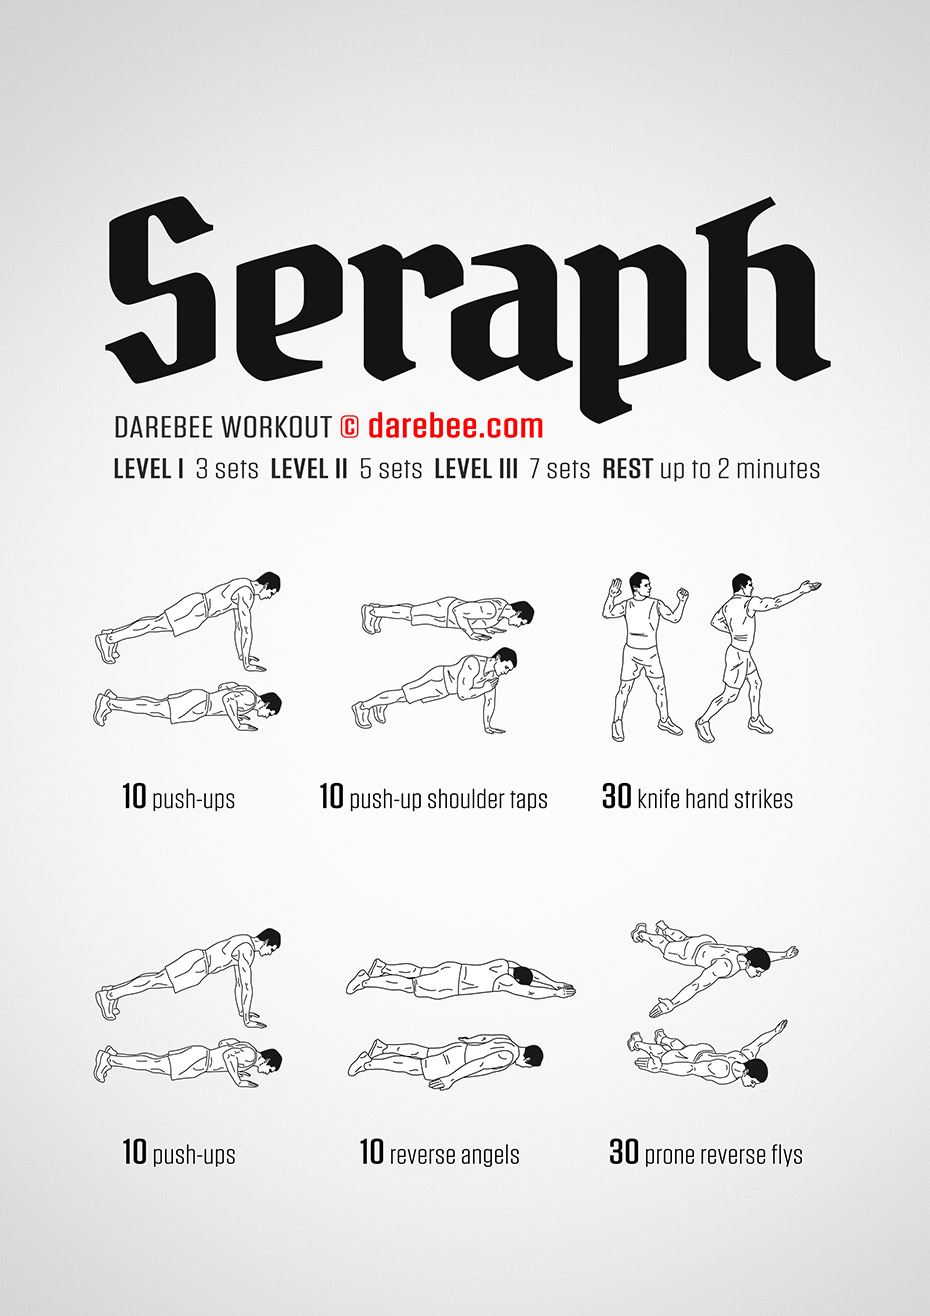 The Seraph is a free Darebee workout